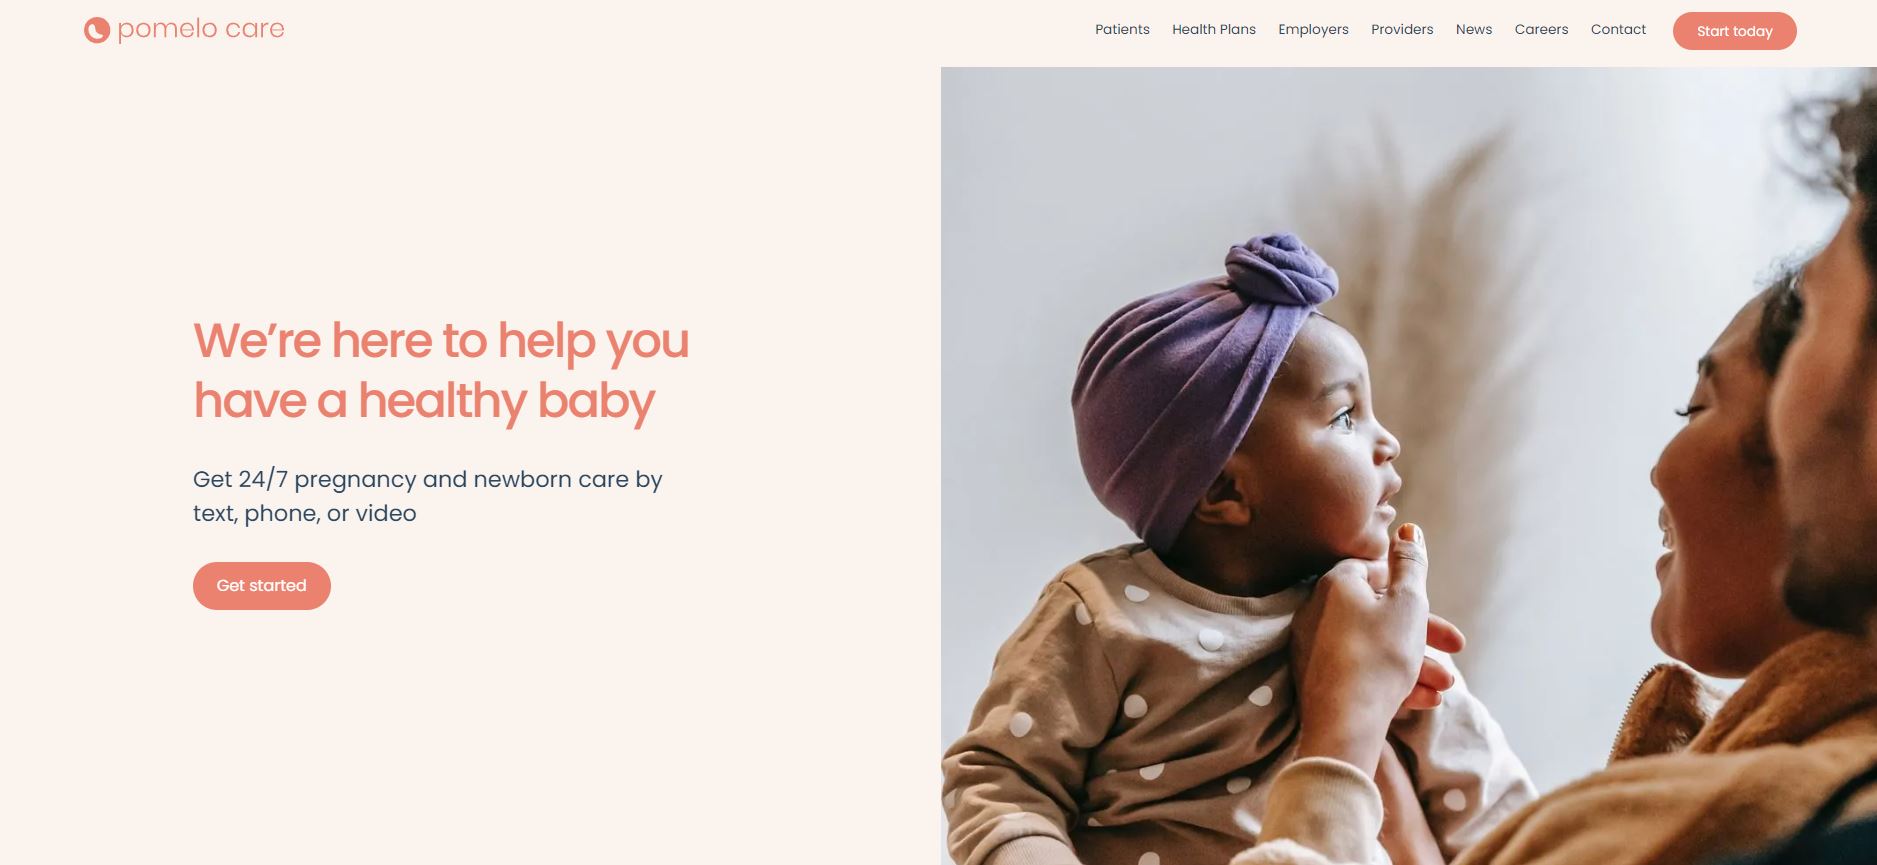 With an impressive $33M raised in seed funding, Pomelo Care is revolutionizing the way we approach pregnancy and newborn care